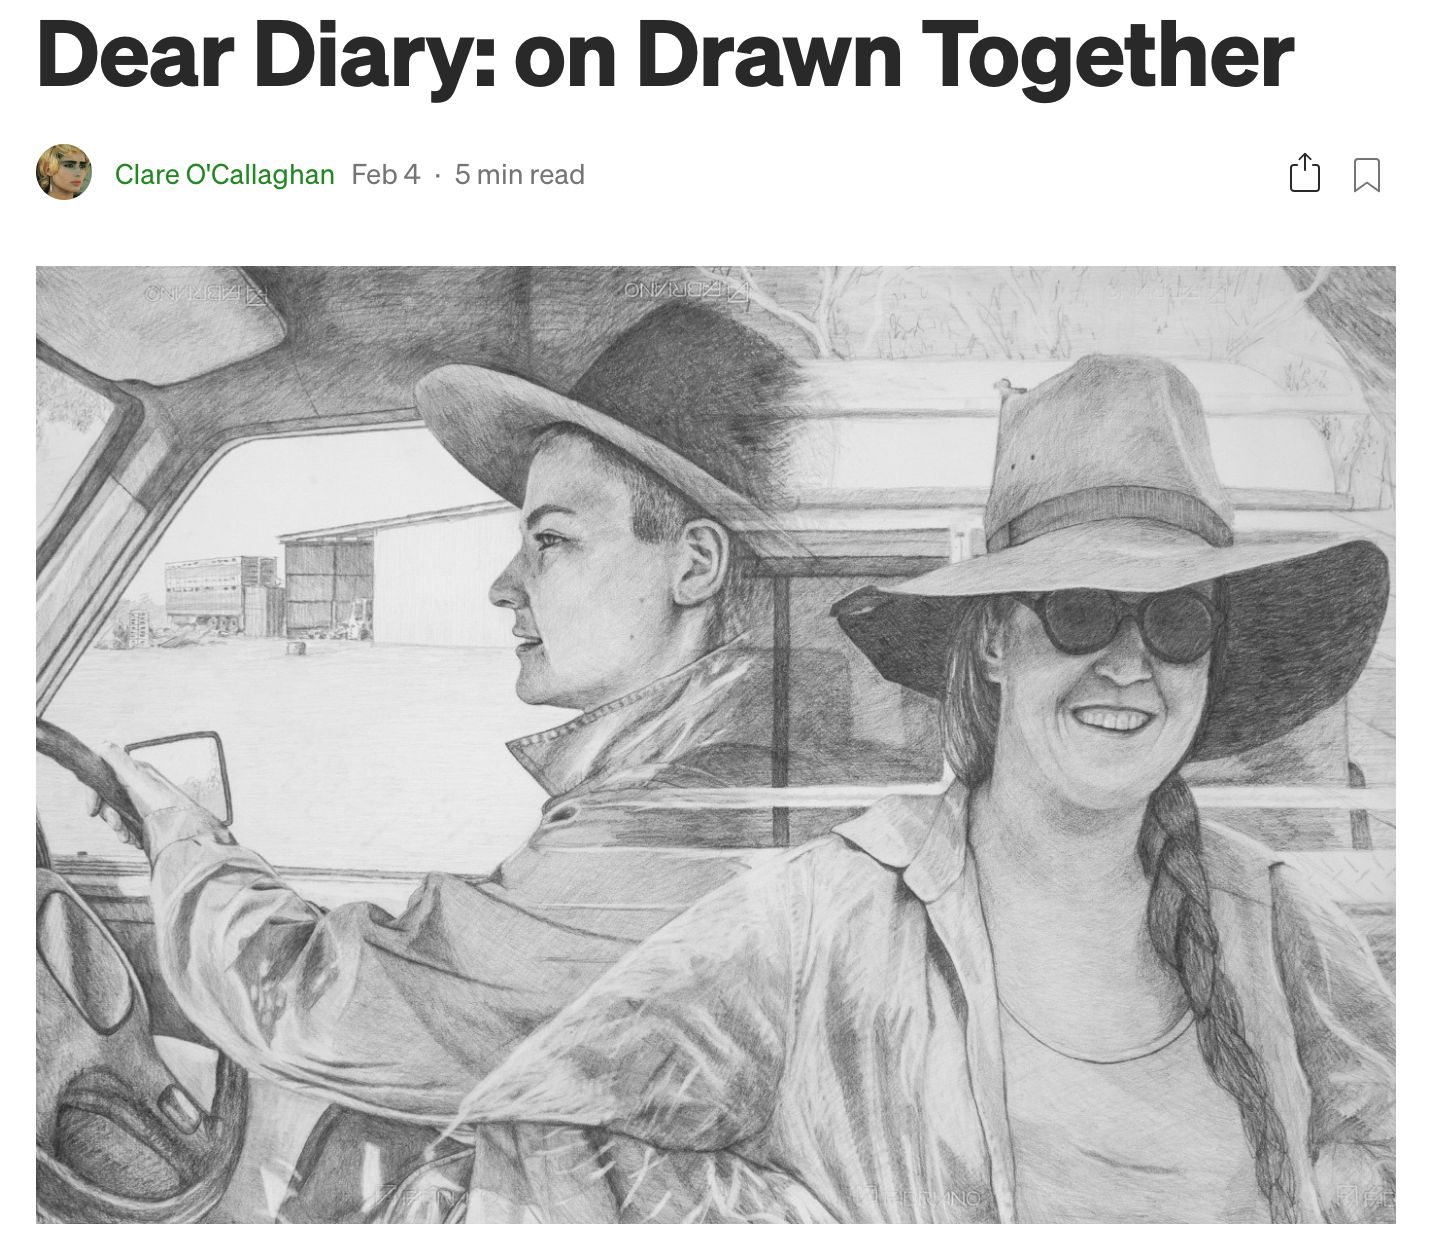 Clare O'Callaghan's review of Drawn Together 